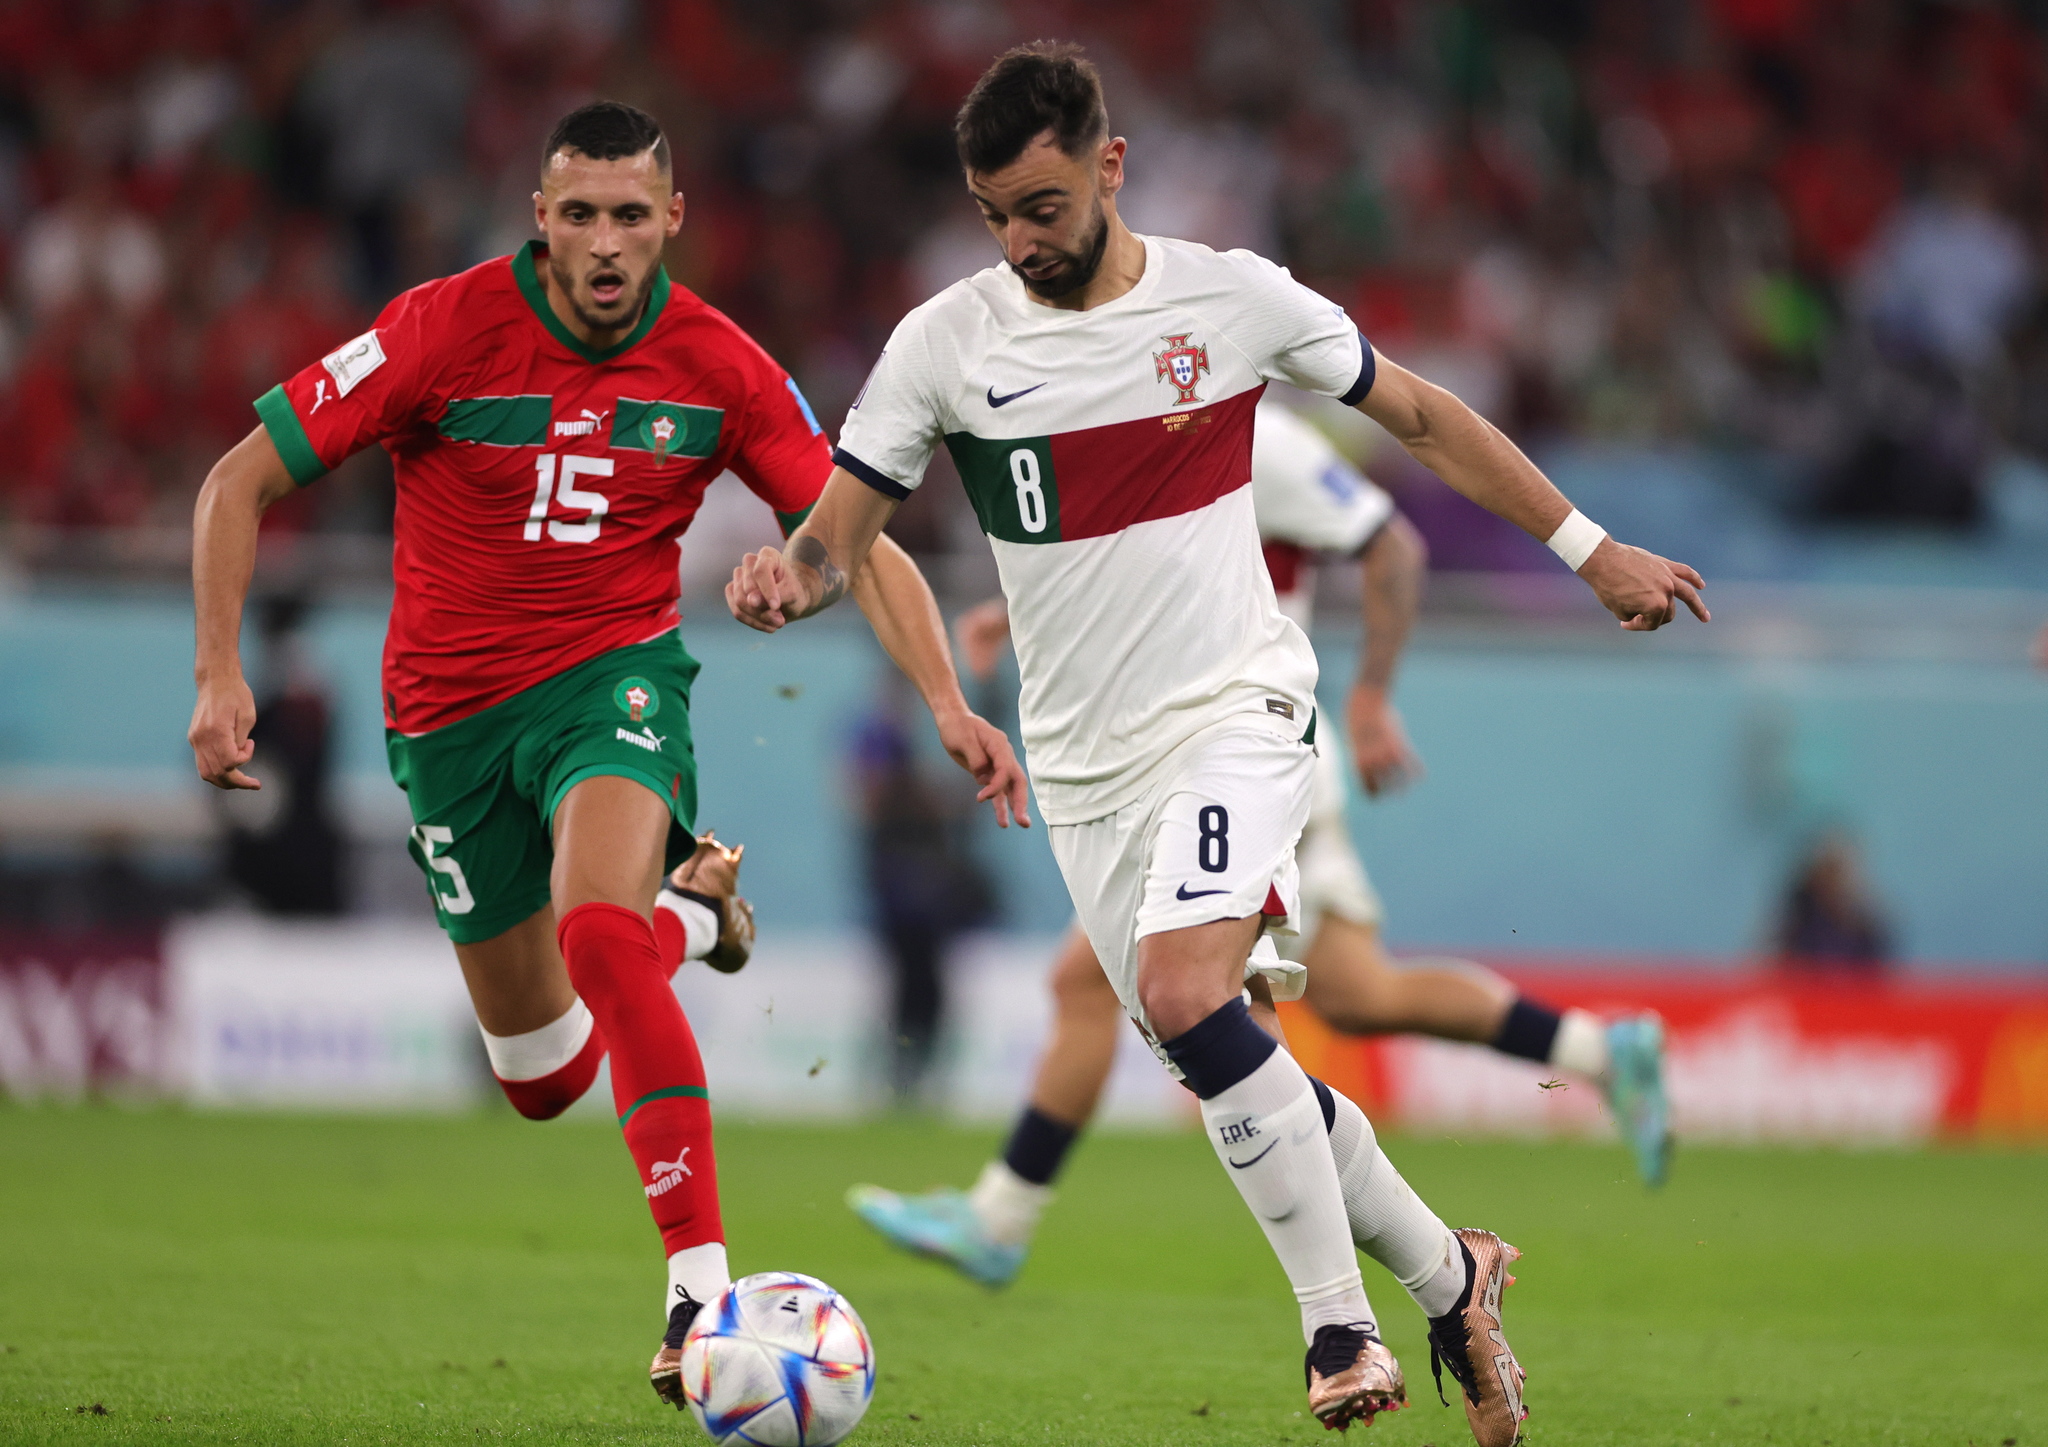 morocco-1-0-portugal-history-made-at-the-2022-world-cup